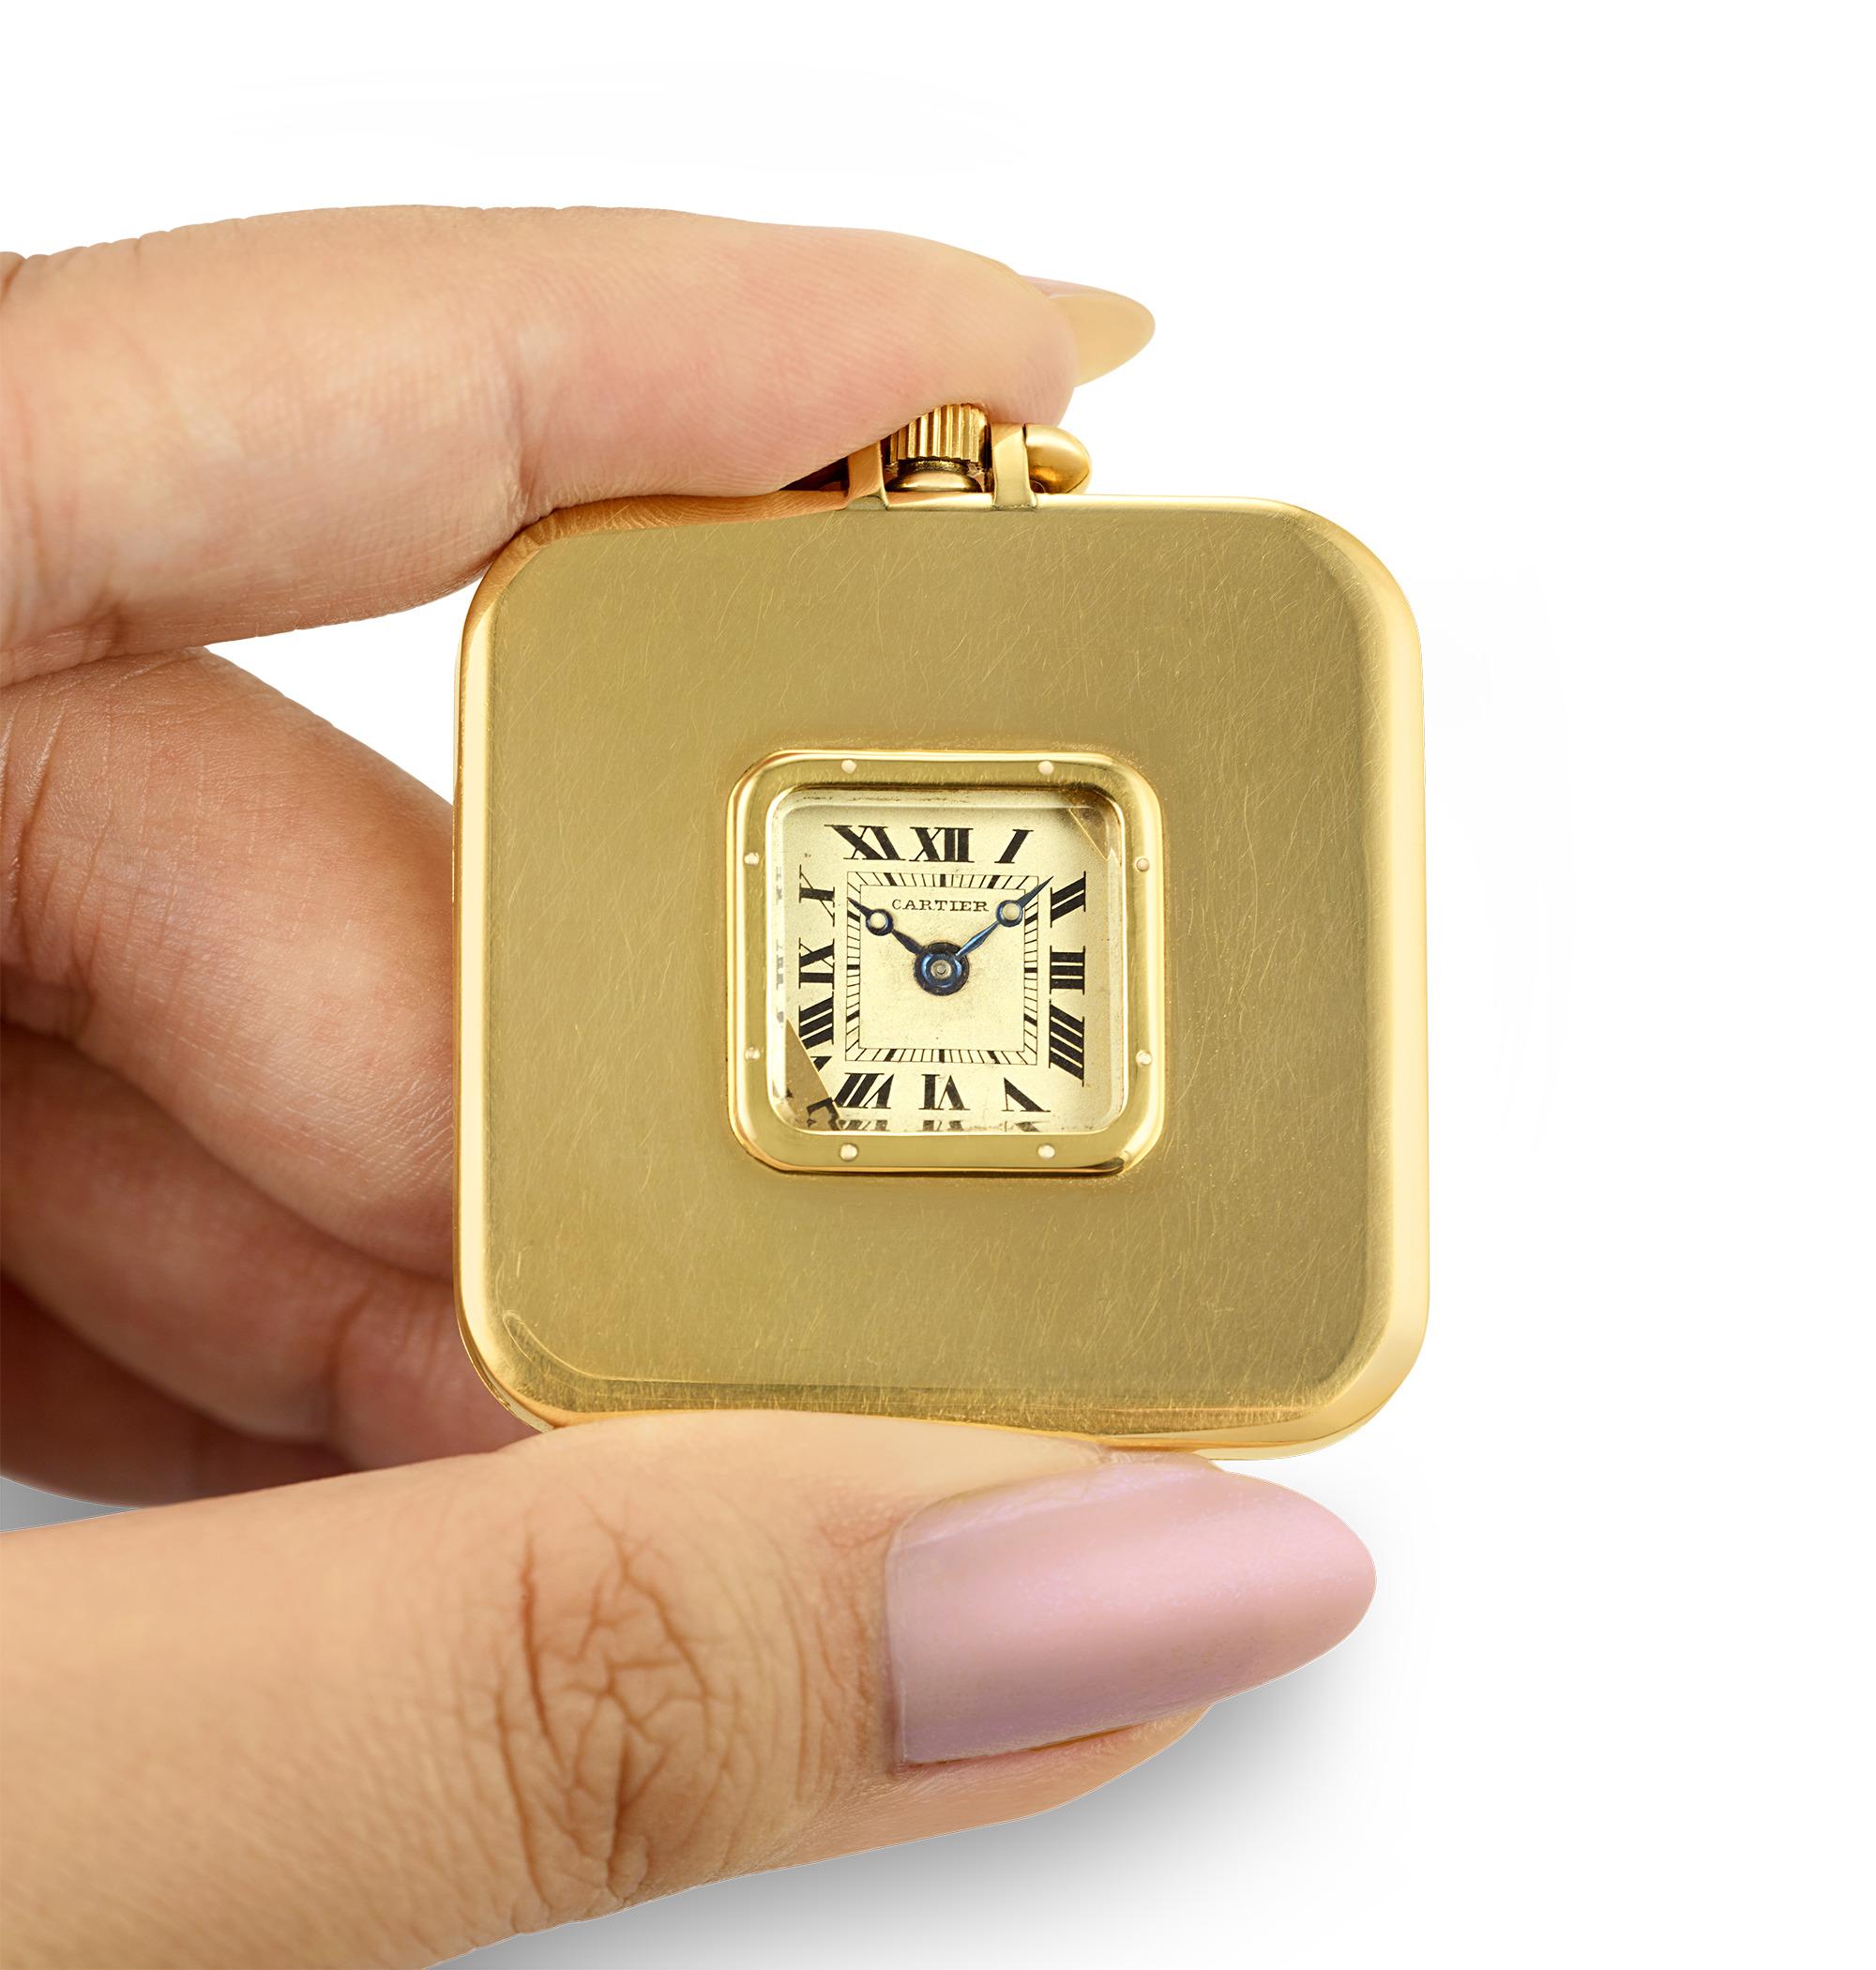 This Art Deco pocket watch was crafted by the famed Cartier. Housed in an 18K gold case, the square-faced timepiece boasts a sleek design. The watch's face, revealed by pressing the knob at its apex, tells the time with black Roman numerals and